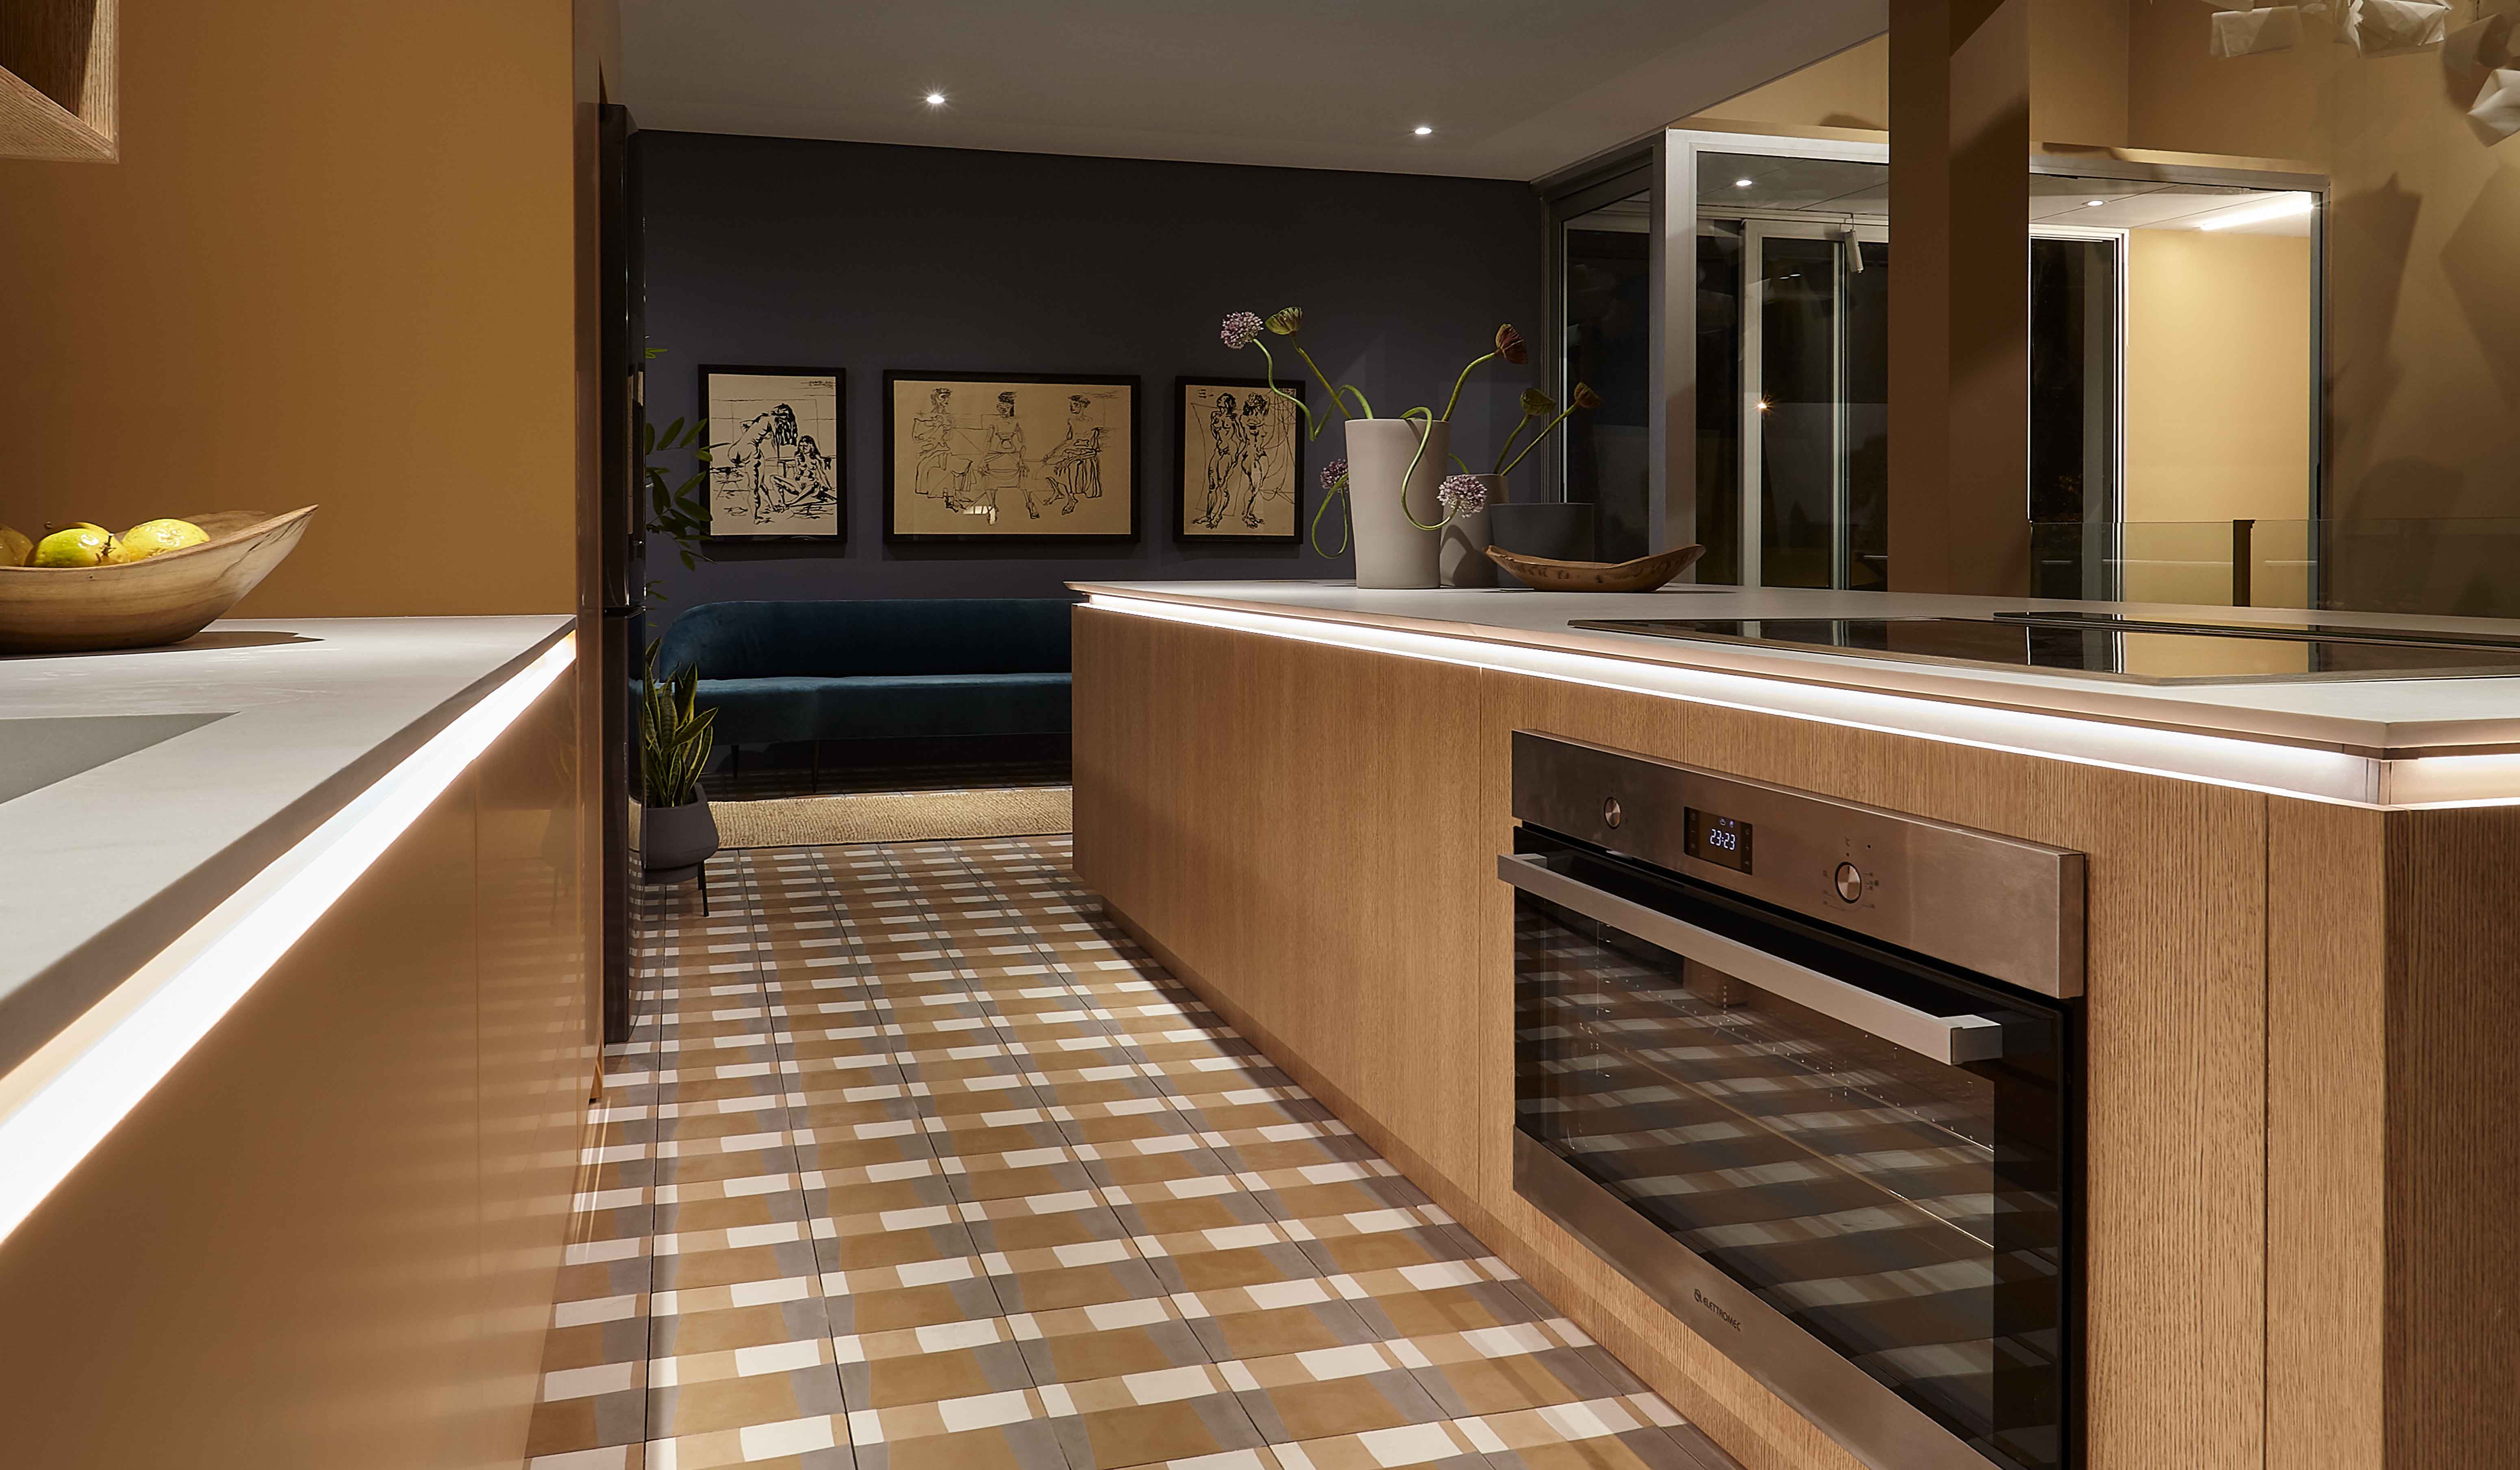 Dell Anno's Modern Kitchen Is All About Contemporary Luxury Cabinetry, Timeless Design And Fine Craftsmanship.